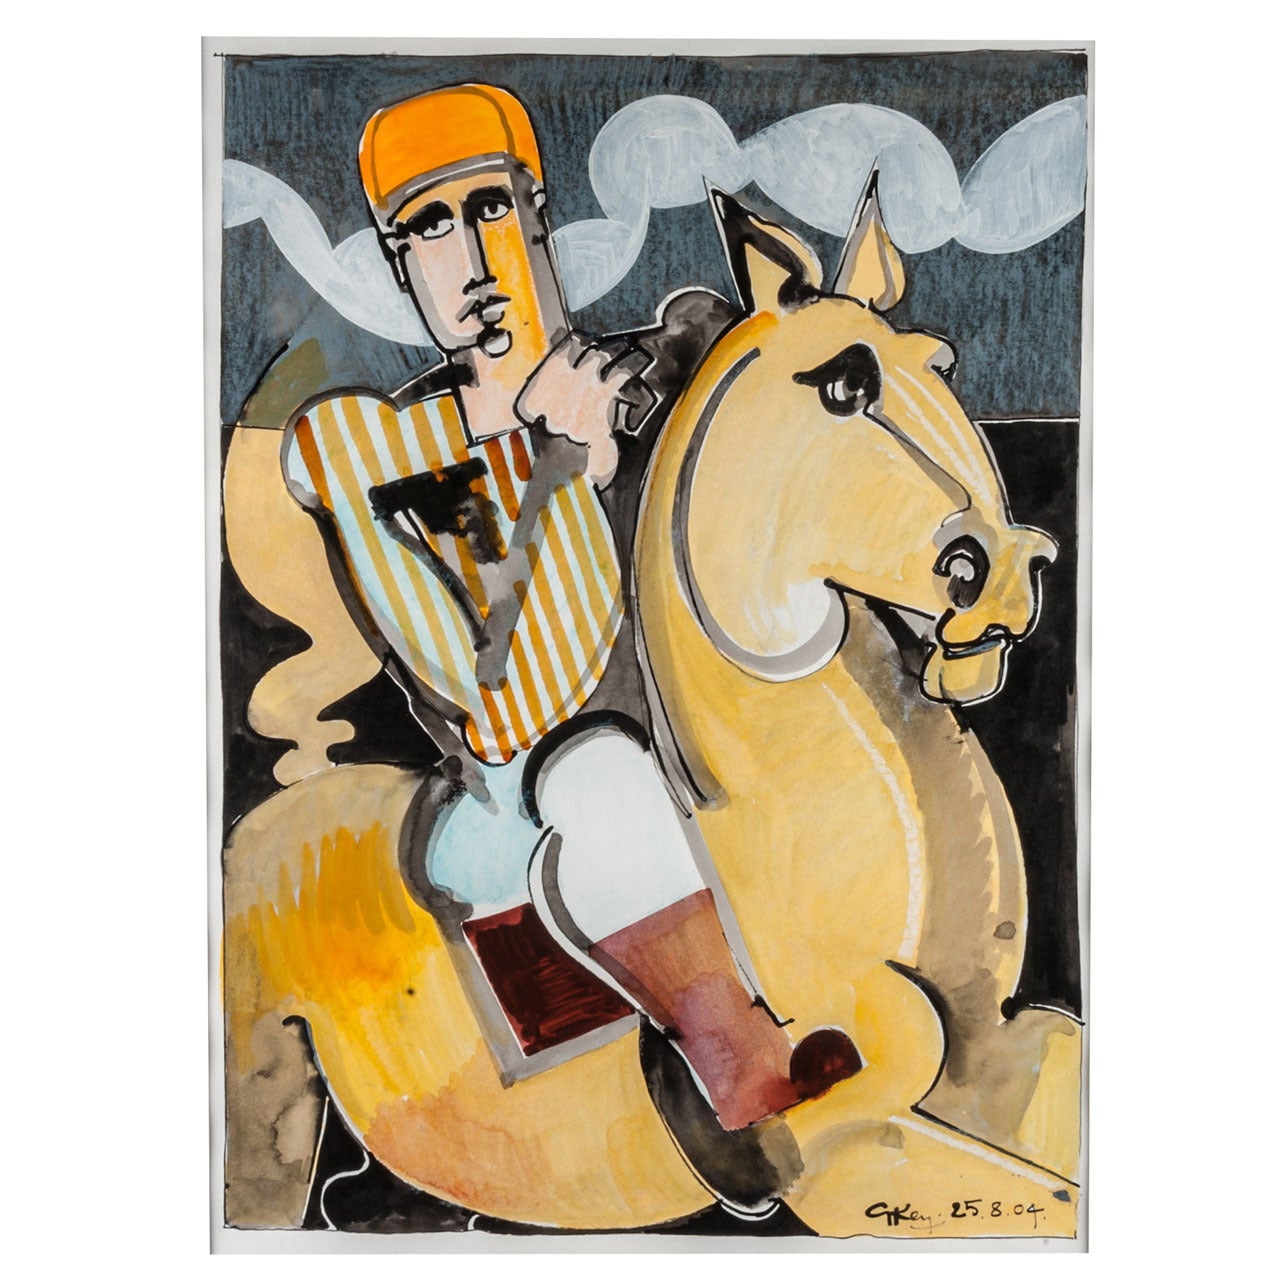 Geoffrey Key painting "Rider with striped silks", England 2004 For Sale